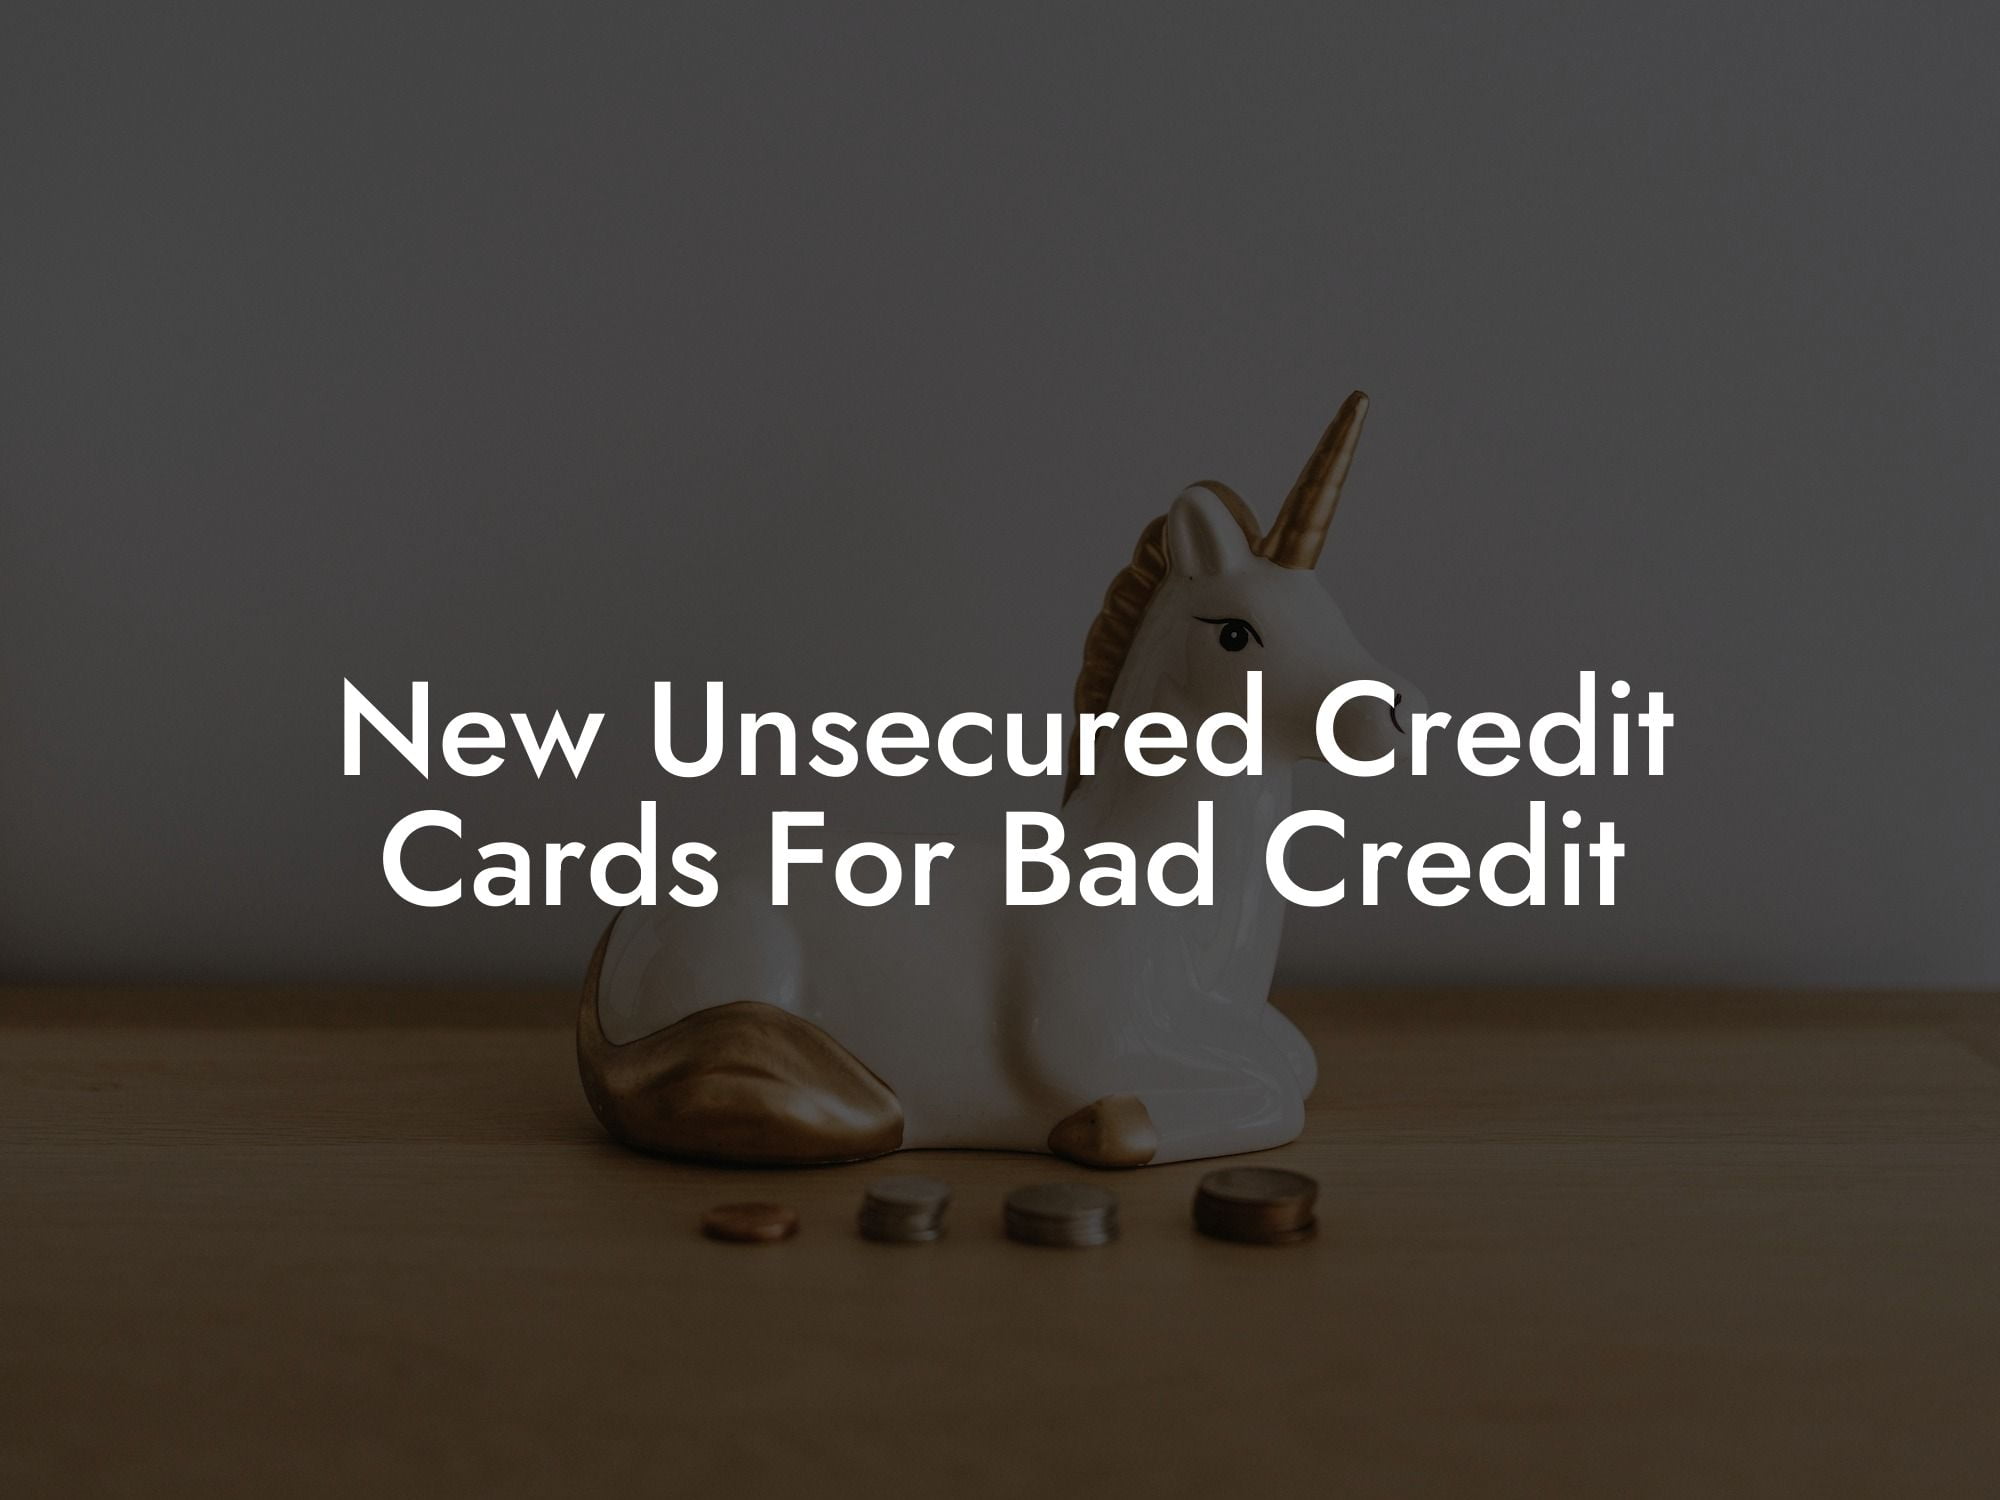 New Unsecured Credit Cards For Bad Credit